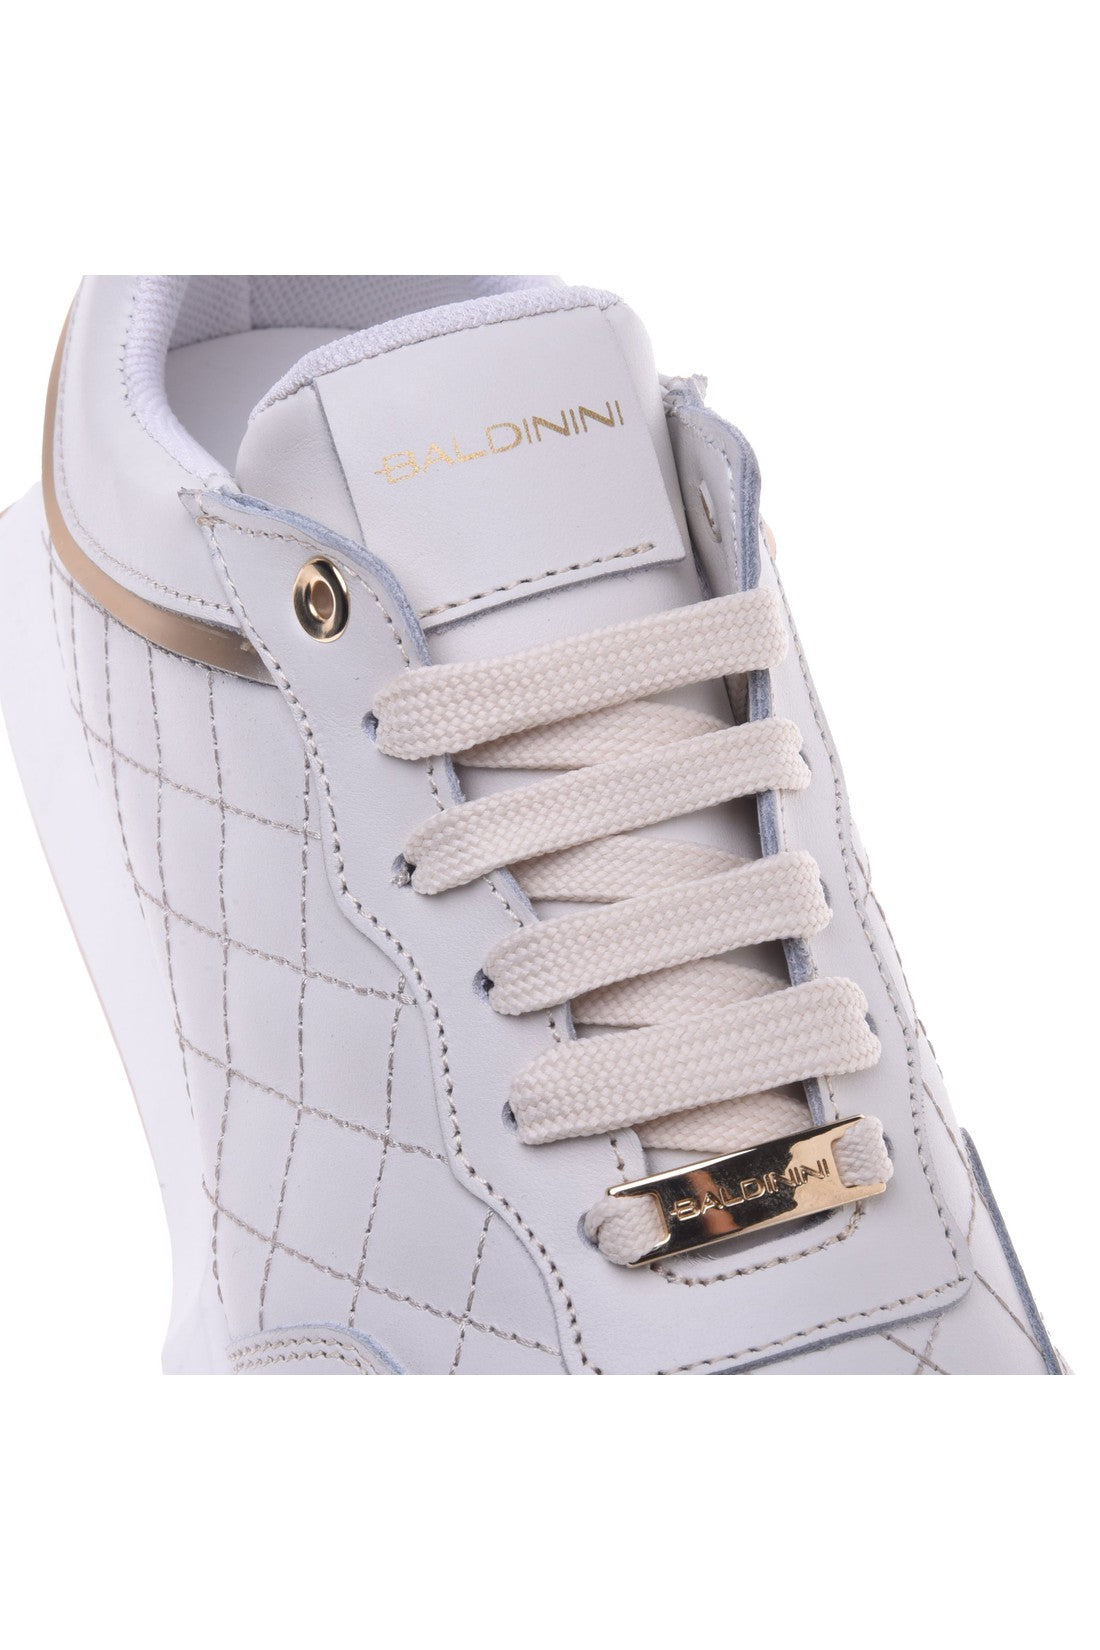 BALDININI-OUTLET-SALE-Sneakers-in-cream-quilted-leather-Sneaker-ARCHIVE-COLLECTION-4.jpg